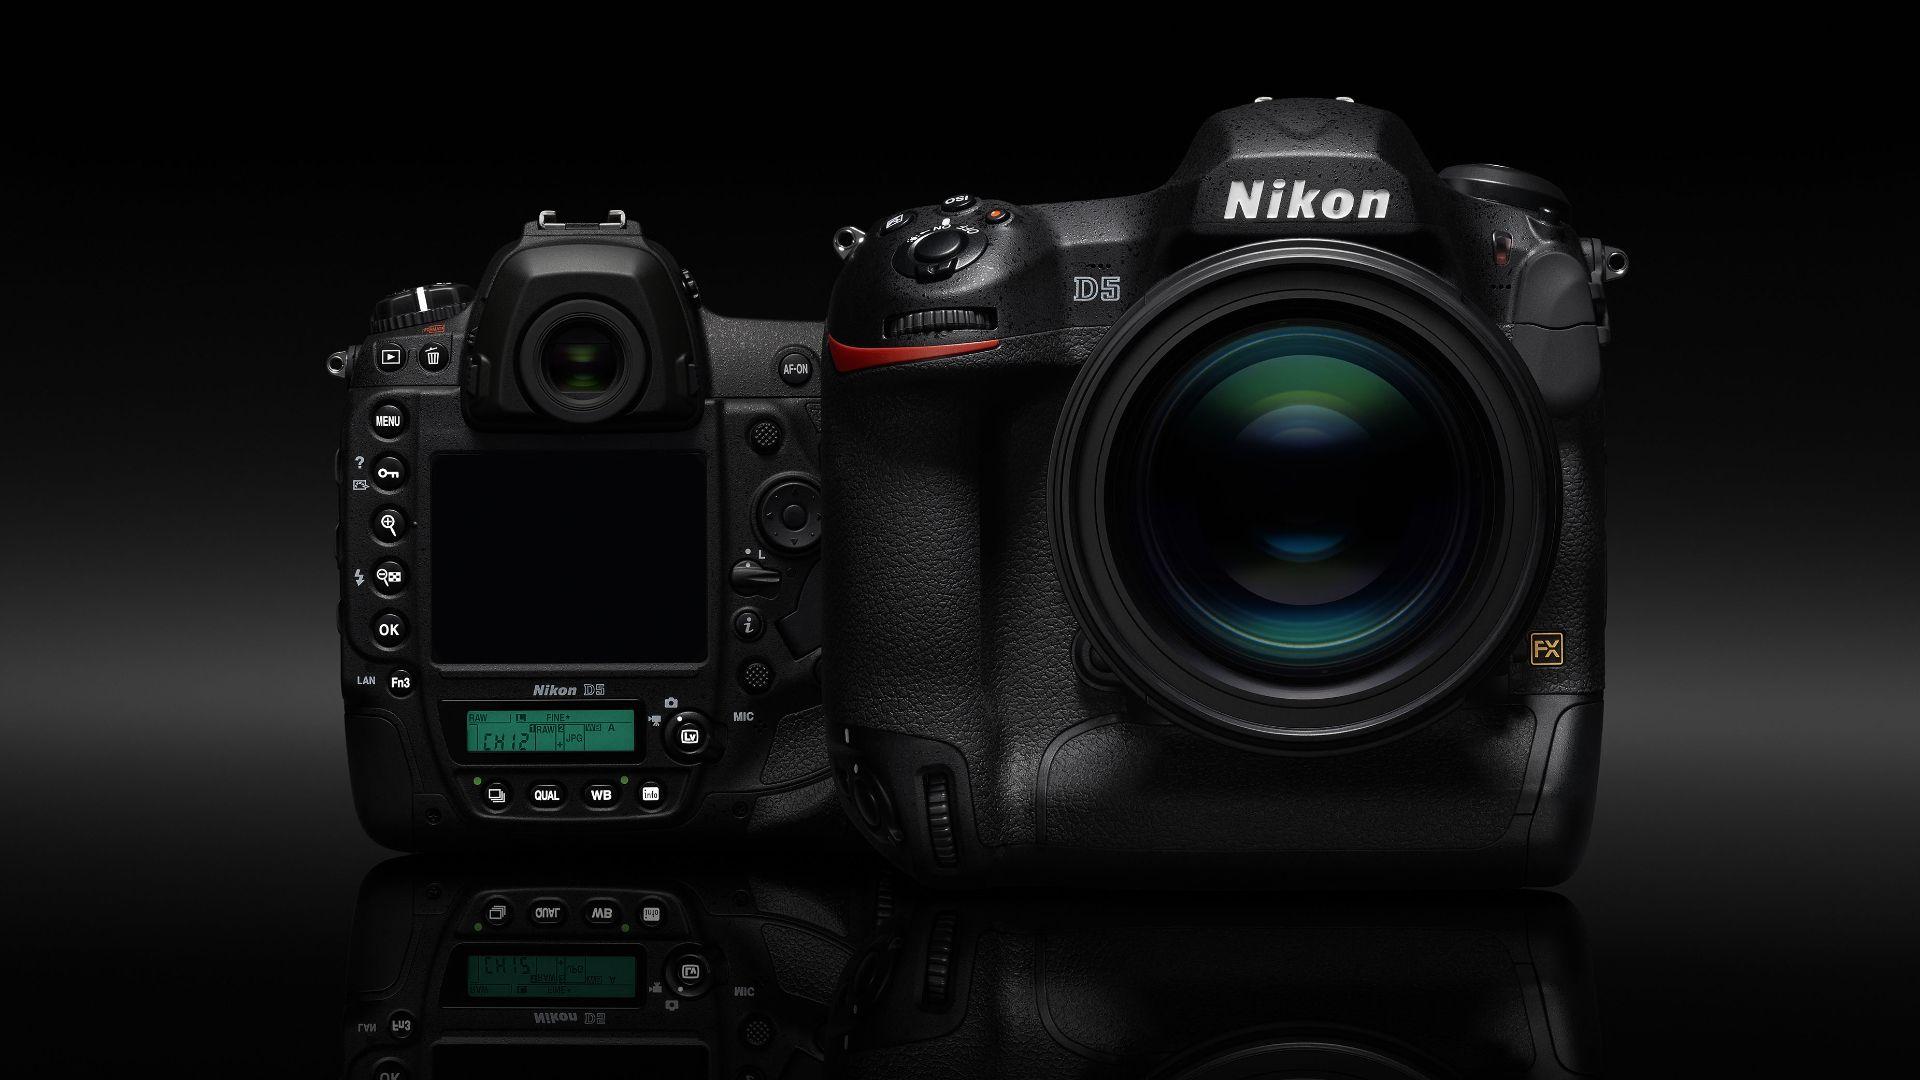 Nikon D5 firmware update now available. Digital Camera World